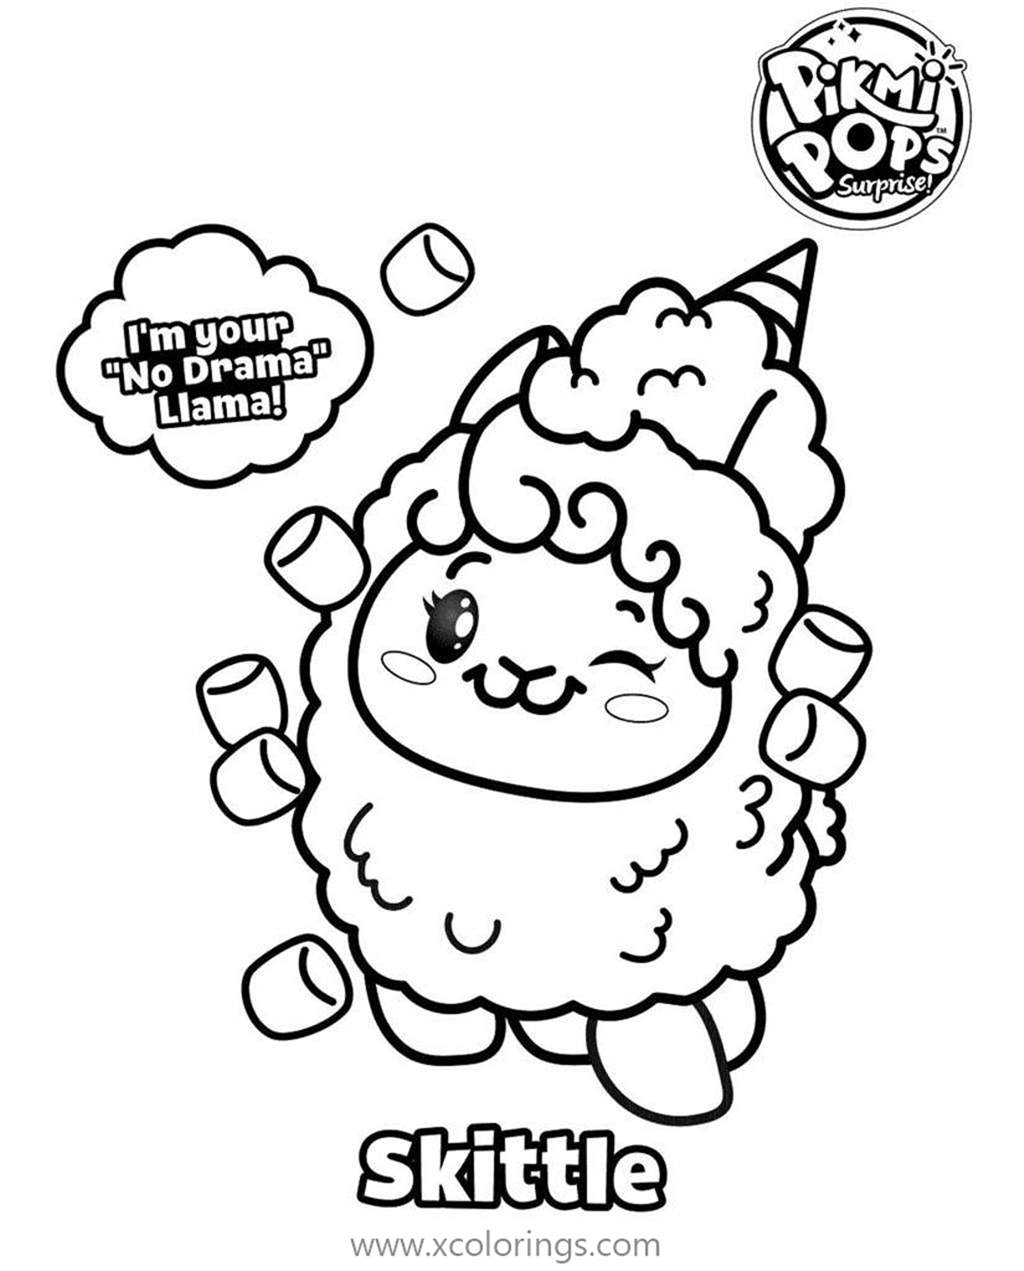 Free Skittle from Pikmi Pops Coloring Pages printable